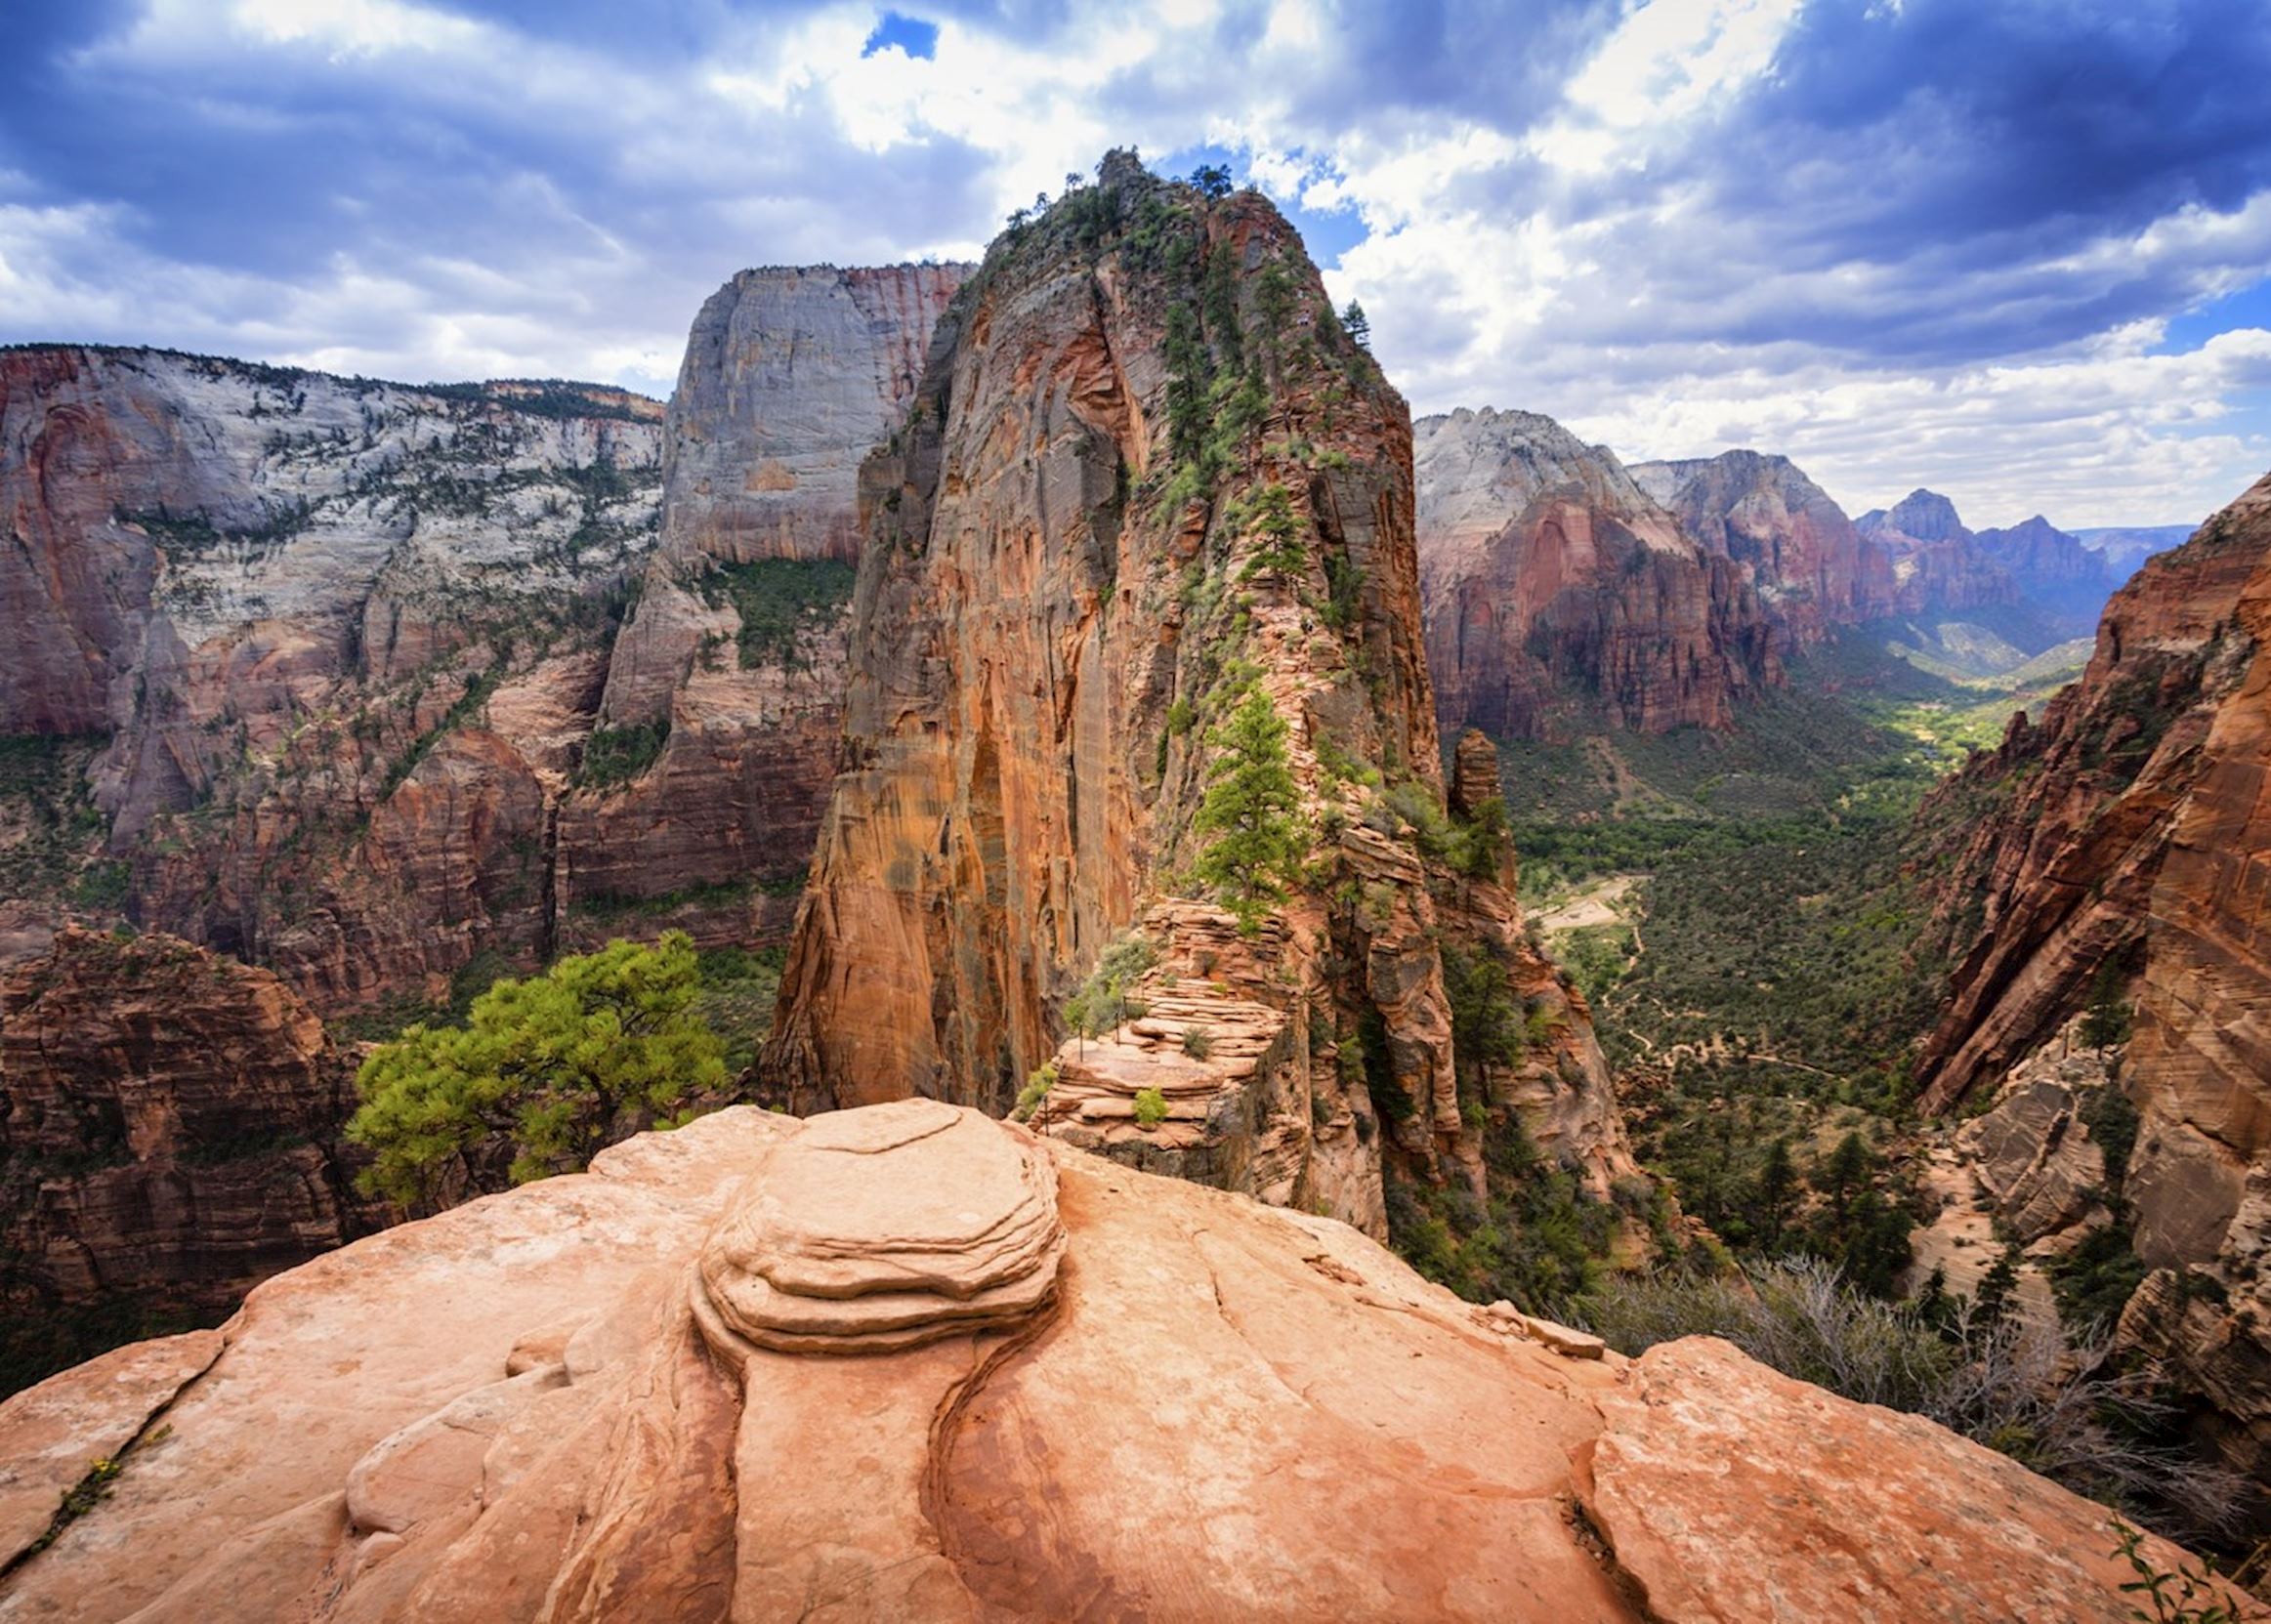 visit-zion-national-park-on-a-trip-to-the-usa-audley-travel-uk